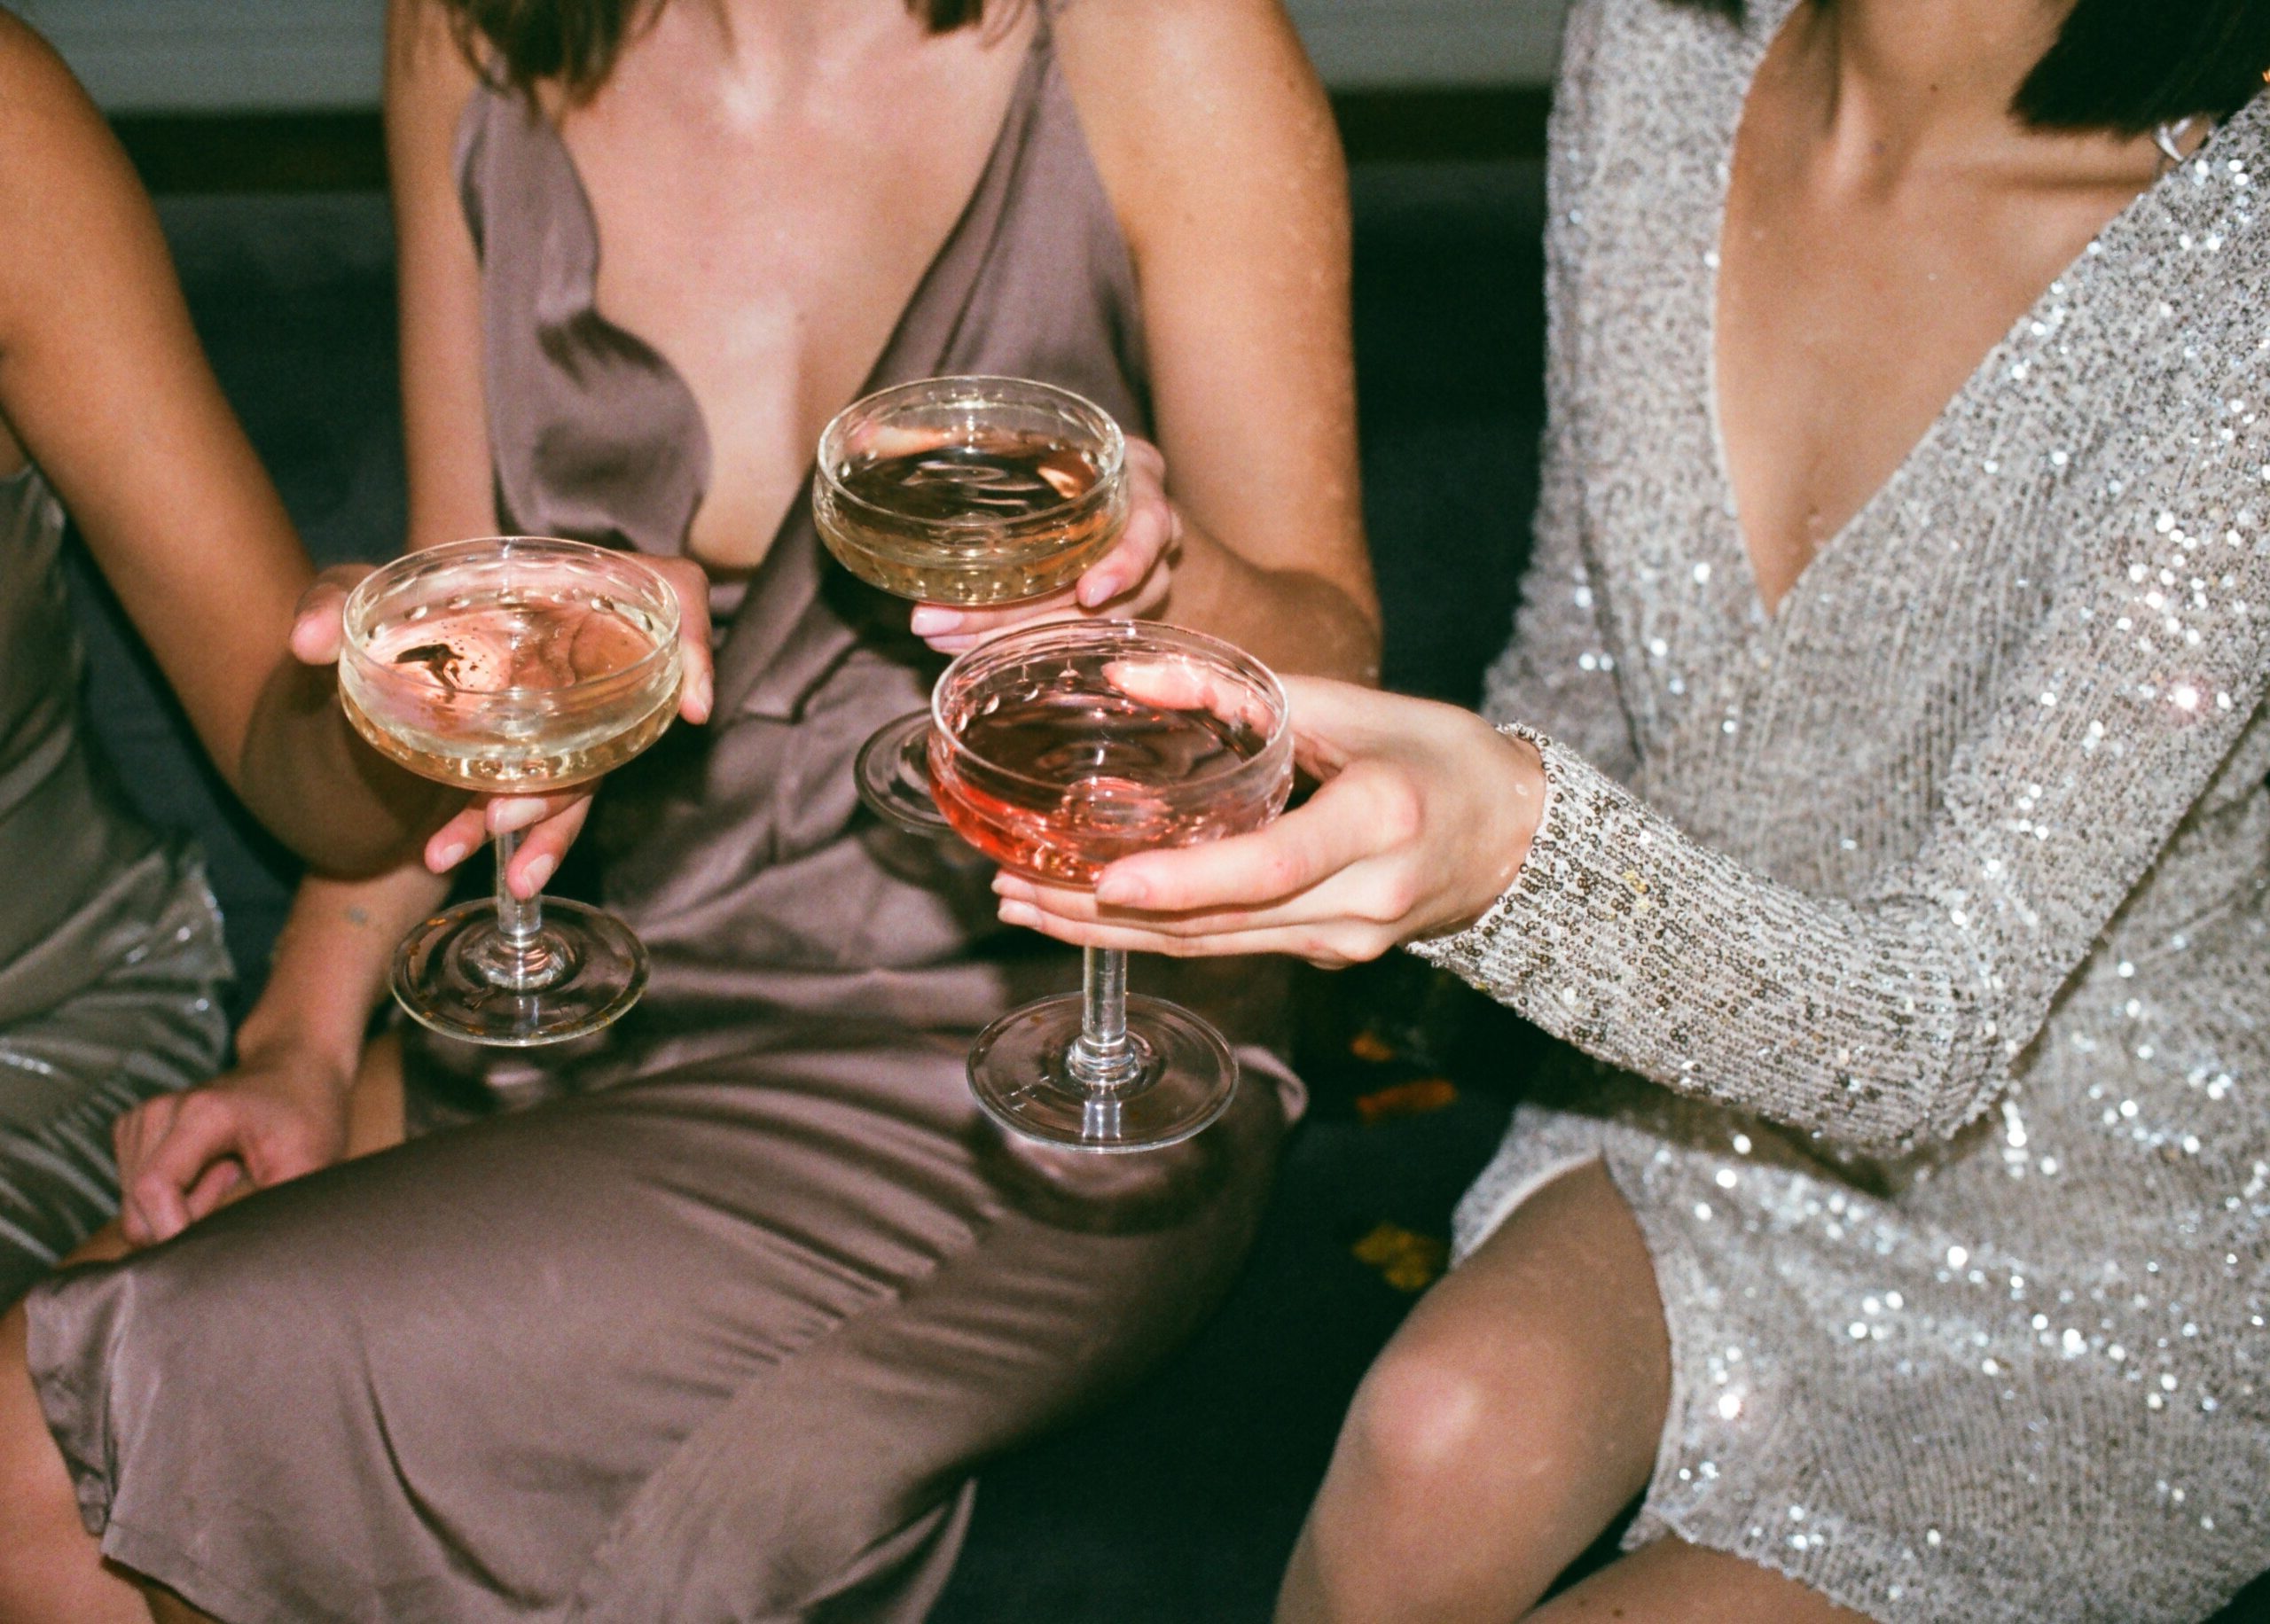 Why you should be worst dressed at the party